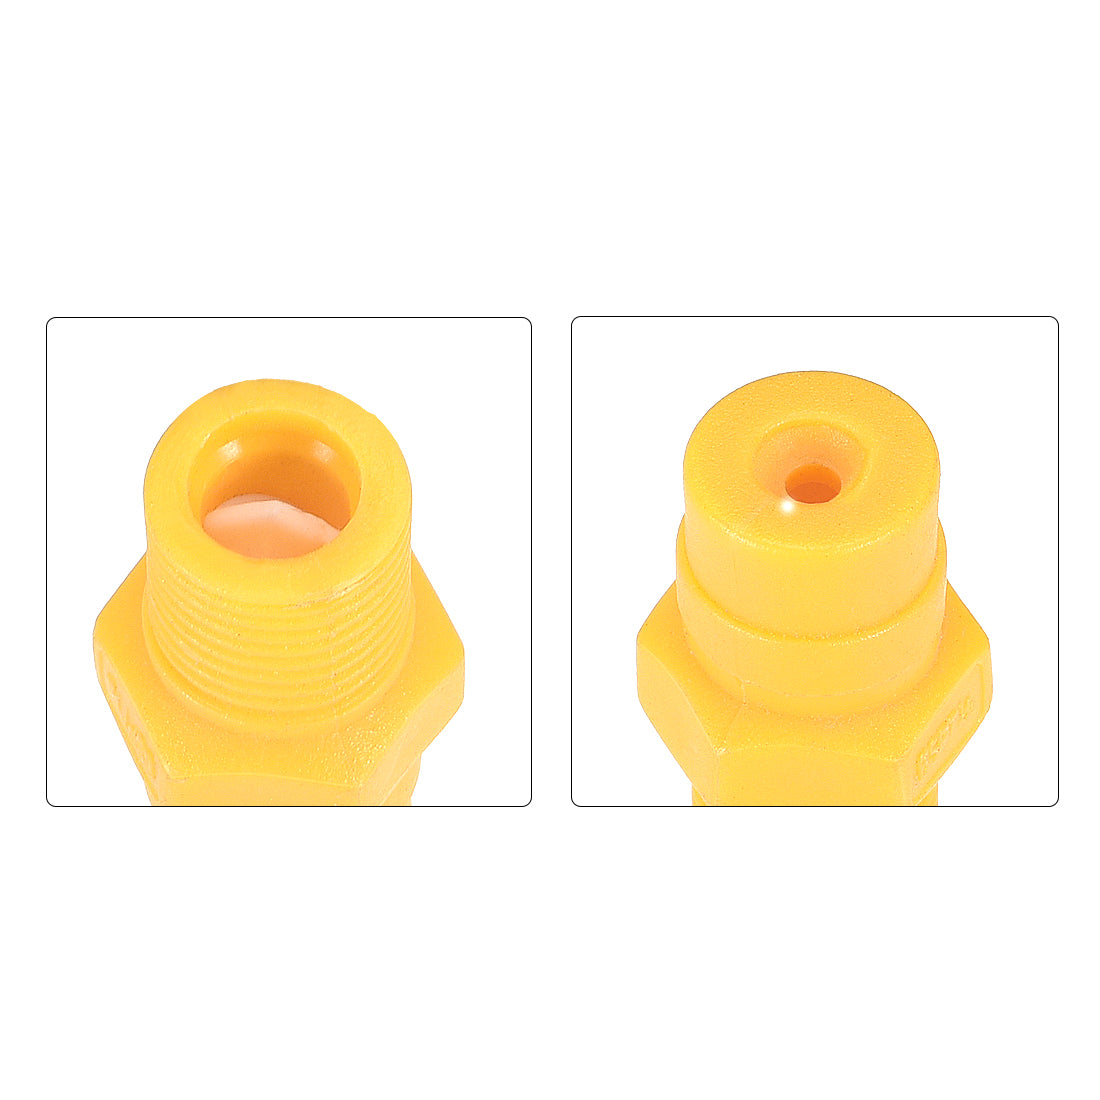 Uxcell Uxcell Full Cone  Tip, 1/8BSPT Plastic PP Wide Angle Nozzle, 2 Pcs